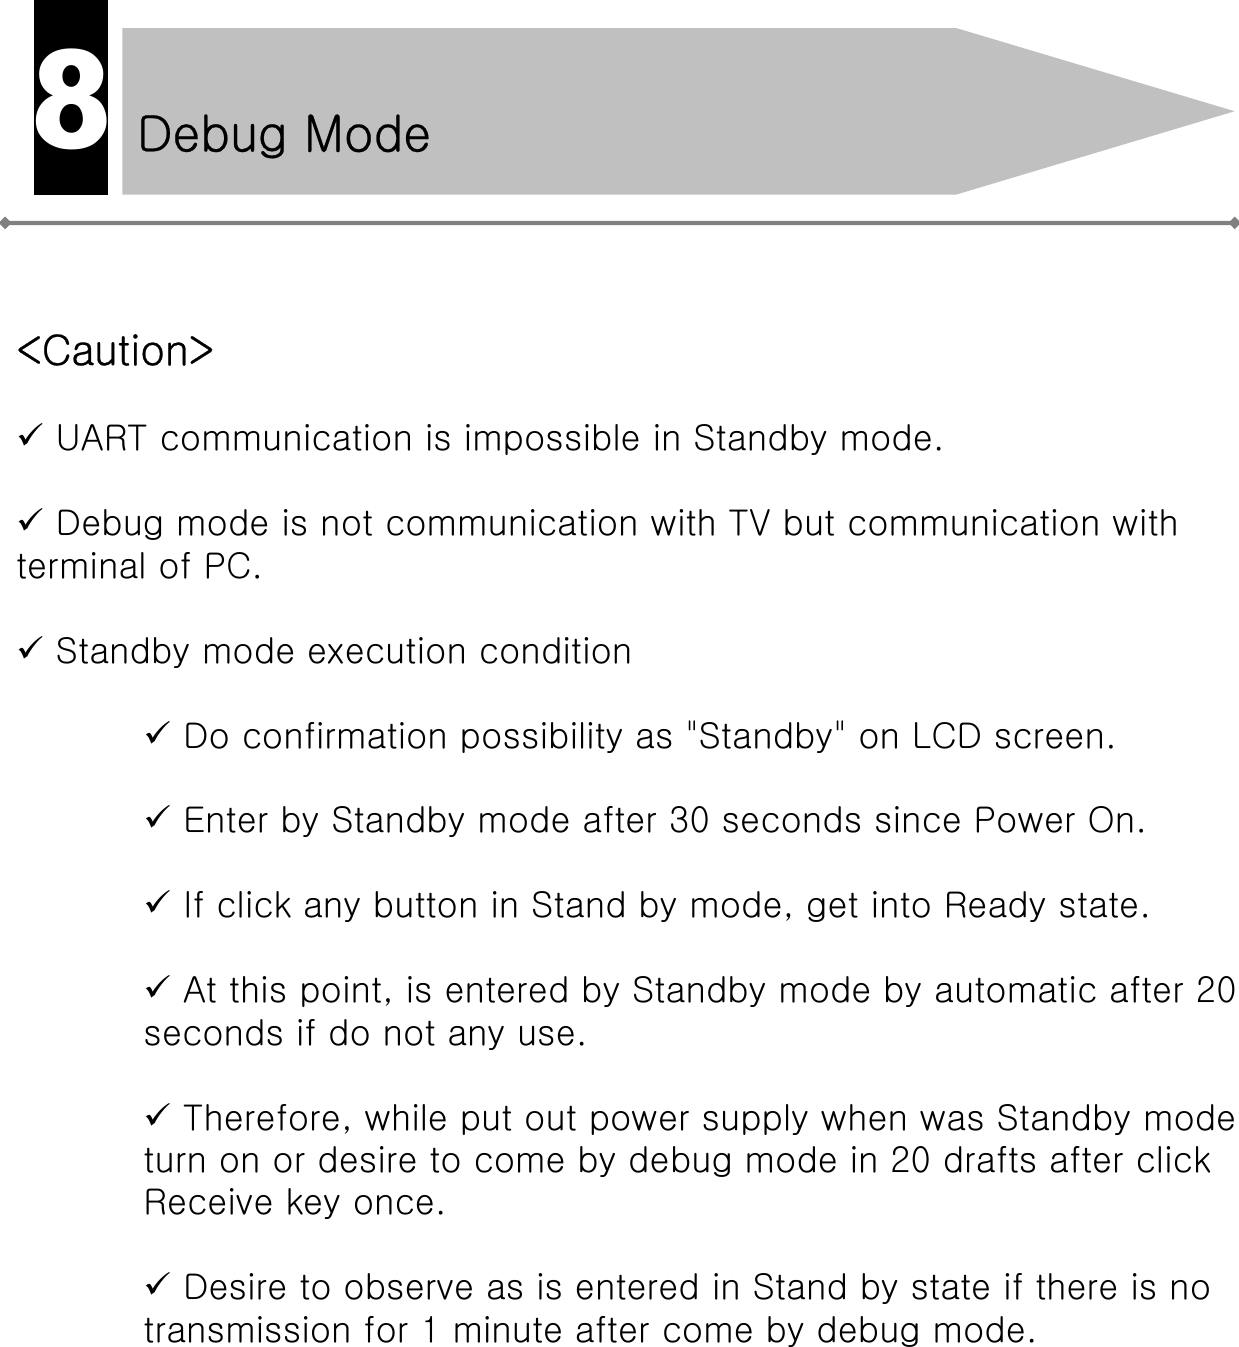 &lt;Caution&gt;9UART communication is impossible in Standby mode.9Debug mode is not communication with TV but communication with terminal of PC.9Standby mode execution condition9Do confirmation possibility as &quot;Standby&quot; on LCD screen.9Enter by Standby mode after 30 seconds since Power On.9If click any button in Stand by mode, get into Ready state.9At this point, is entered by Standby mode by automatic after 20 seconds if do not any use.9Therefore, while put out power supply when was Standby modeturn on or desire to come by debug mode in 20 drafts after clickReceive key once.9Desire to observe as is entered in Stand by state if there is notransmission for 1 minute after come by debug mode.Debug Mode8